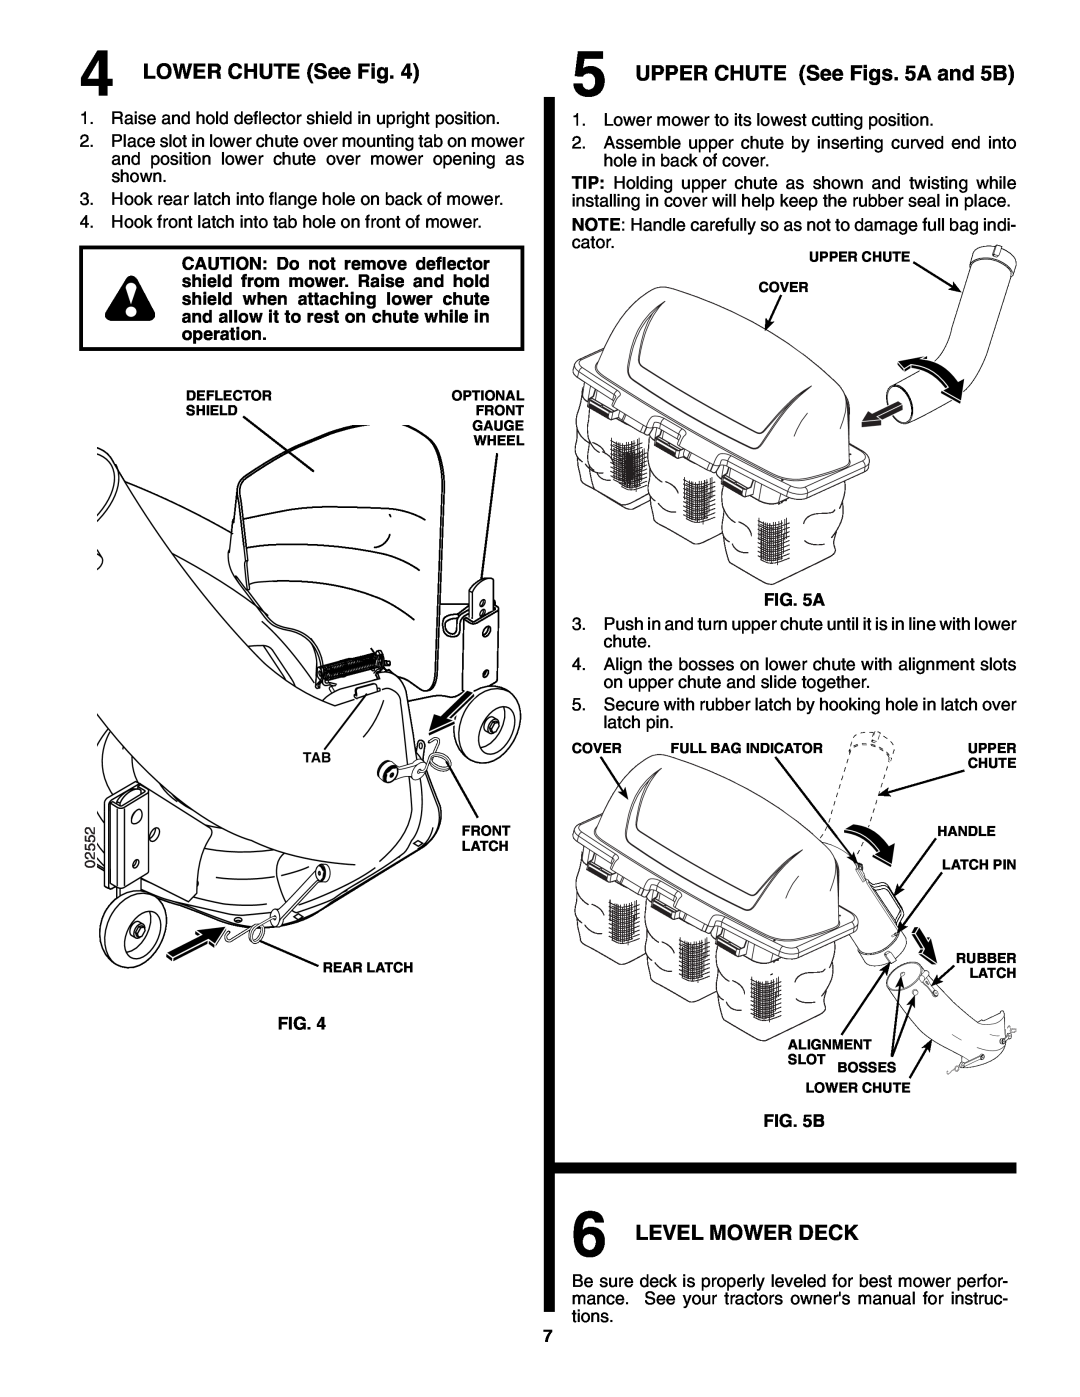 Husqvarna H348SL owner manual LOWER CHUTE See Fig, UPPER CHUTE See Figs. 5A and 5B, Level Mower Deck 